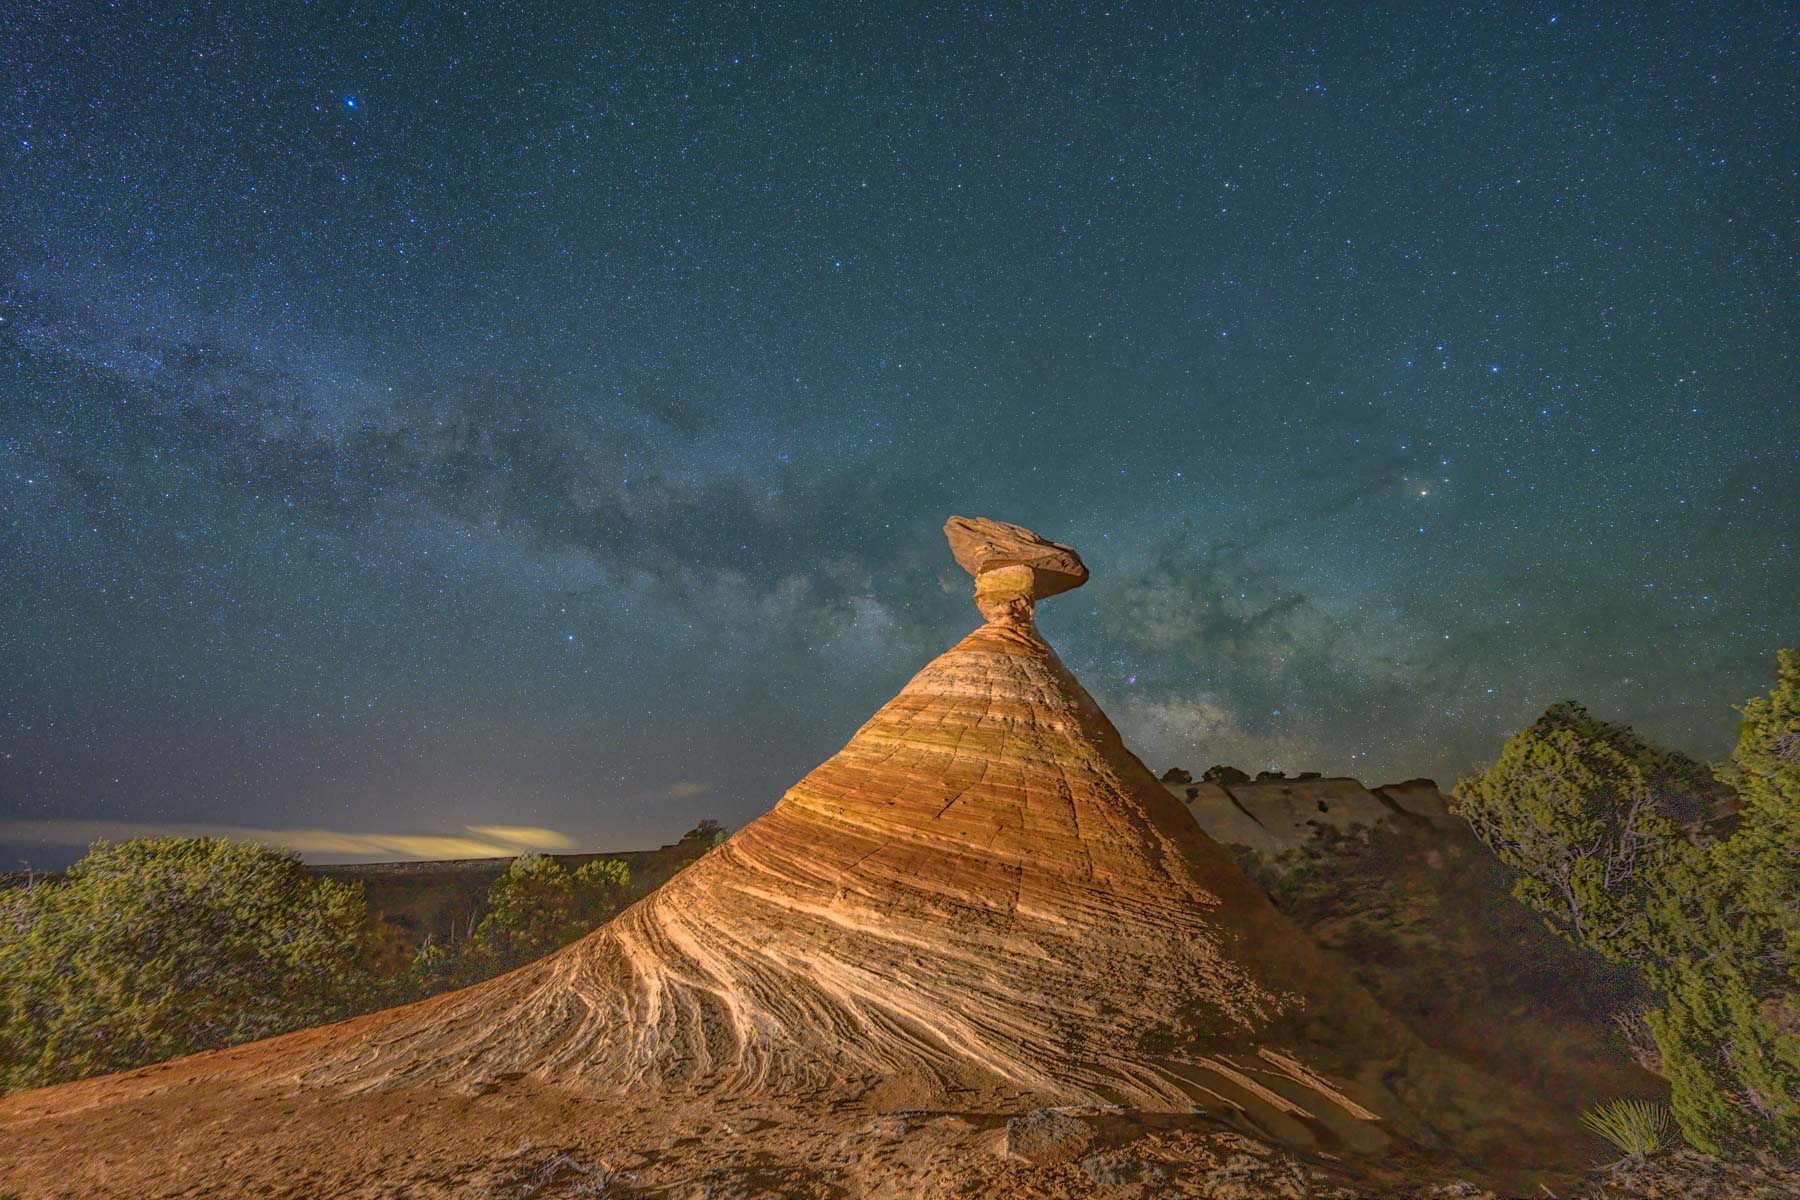 The Milky Way over the Cowboy Hat rock formation in Vermilion Cliffs National Monument